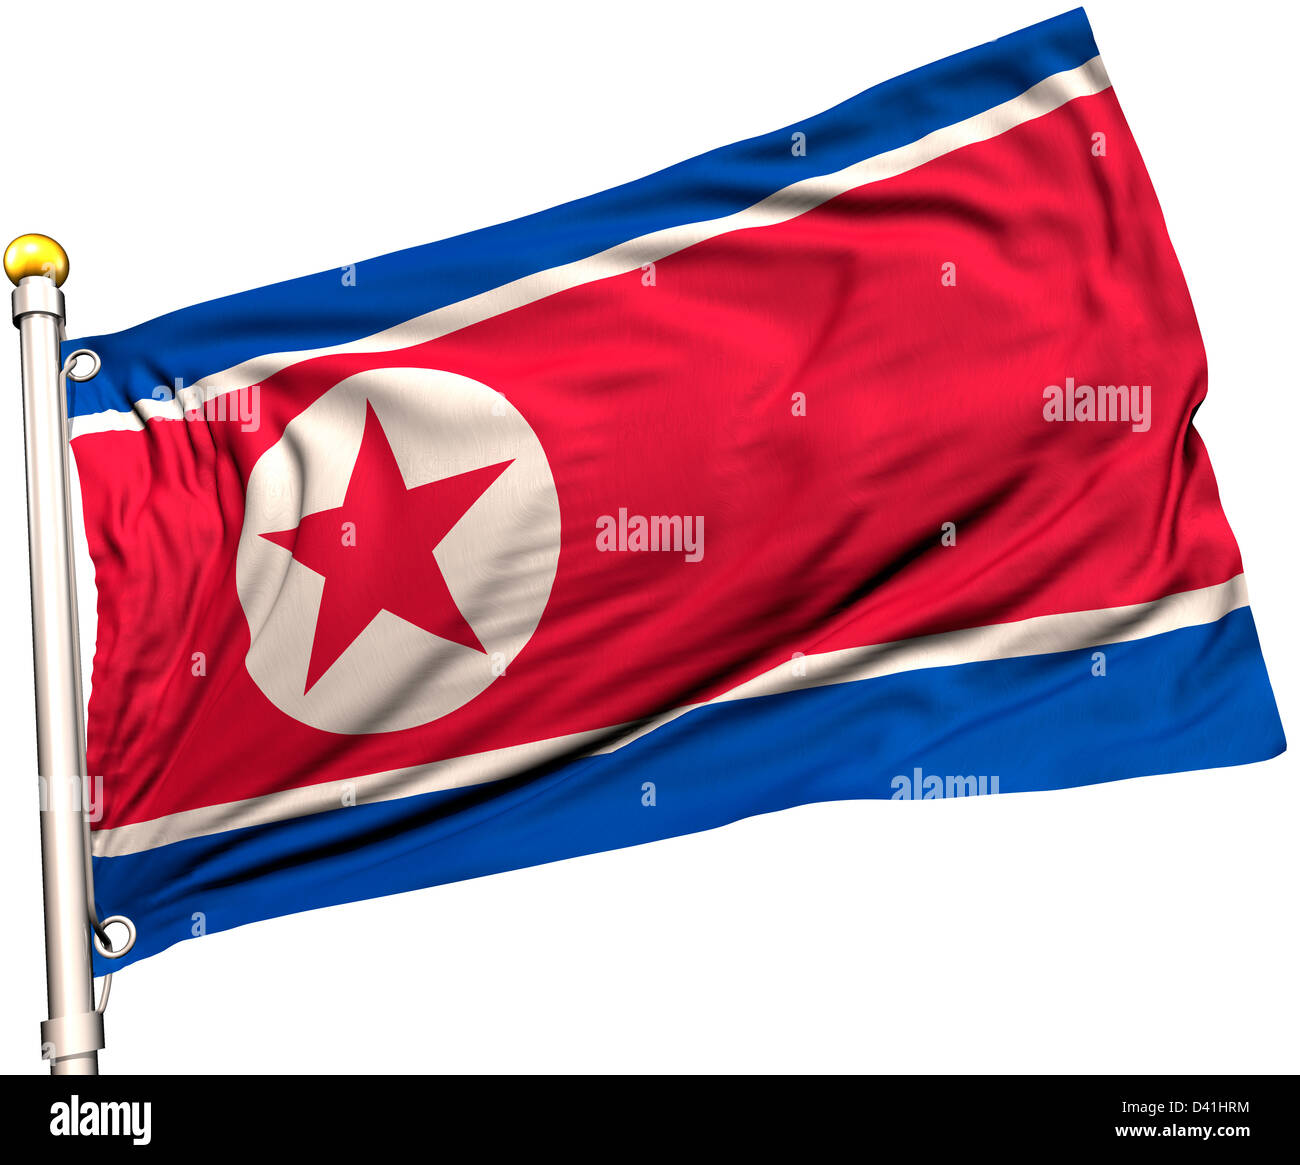 North Korea flag on a flag pole. Clipping path included. Silk texture visible on the flag at 100%. Stock Photo